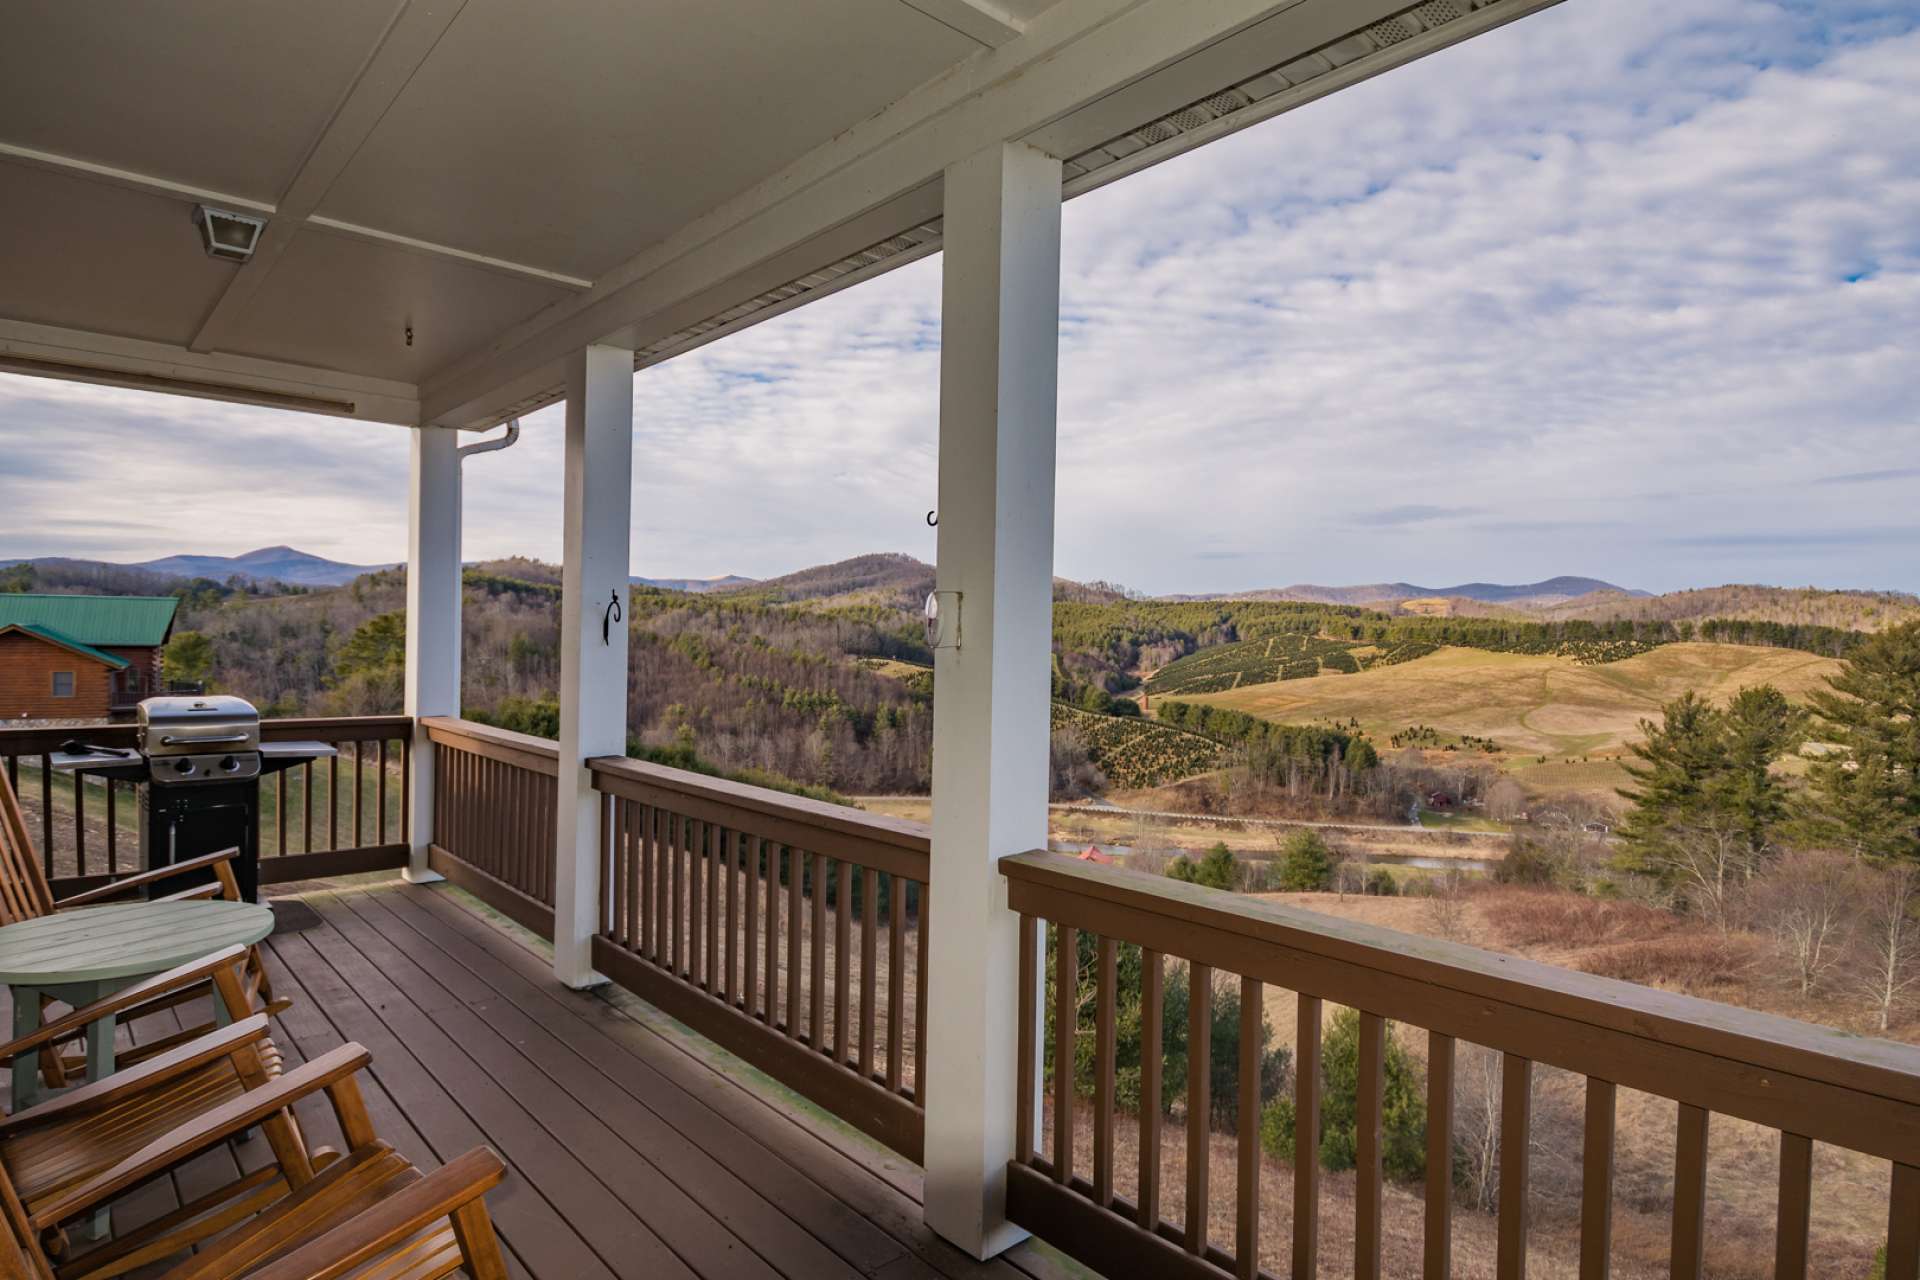 Entertain family and friends or simply relax on the covered back porch and enjoy both mountain and river views.